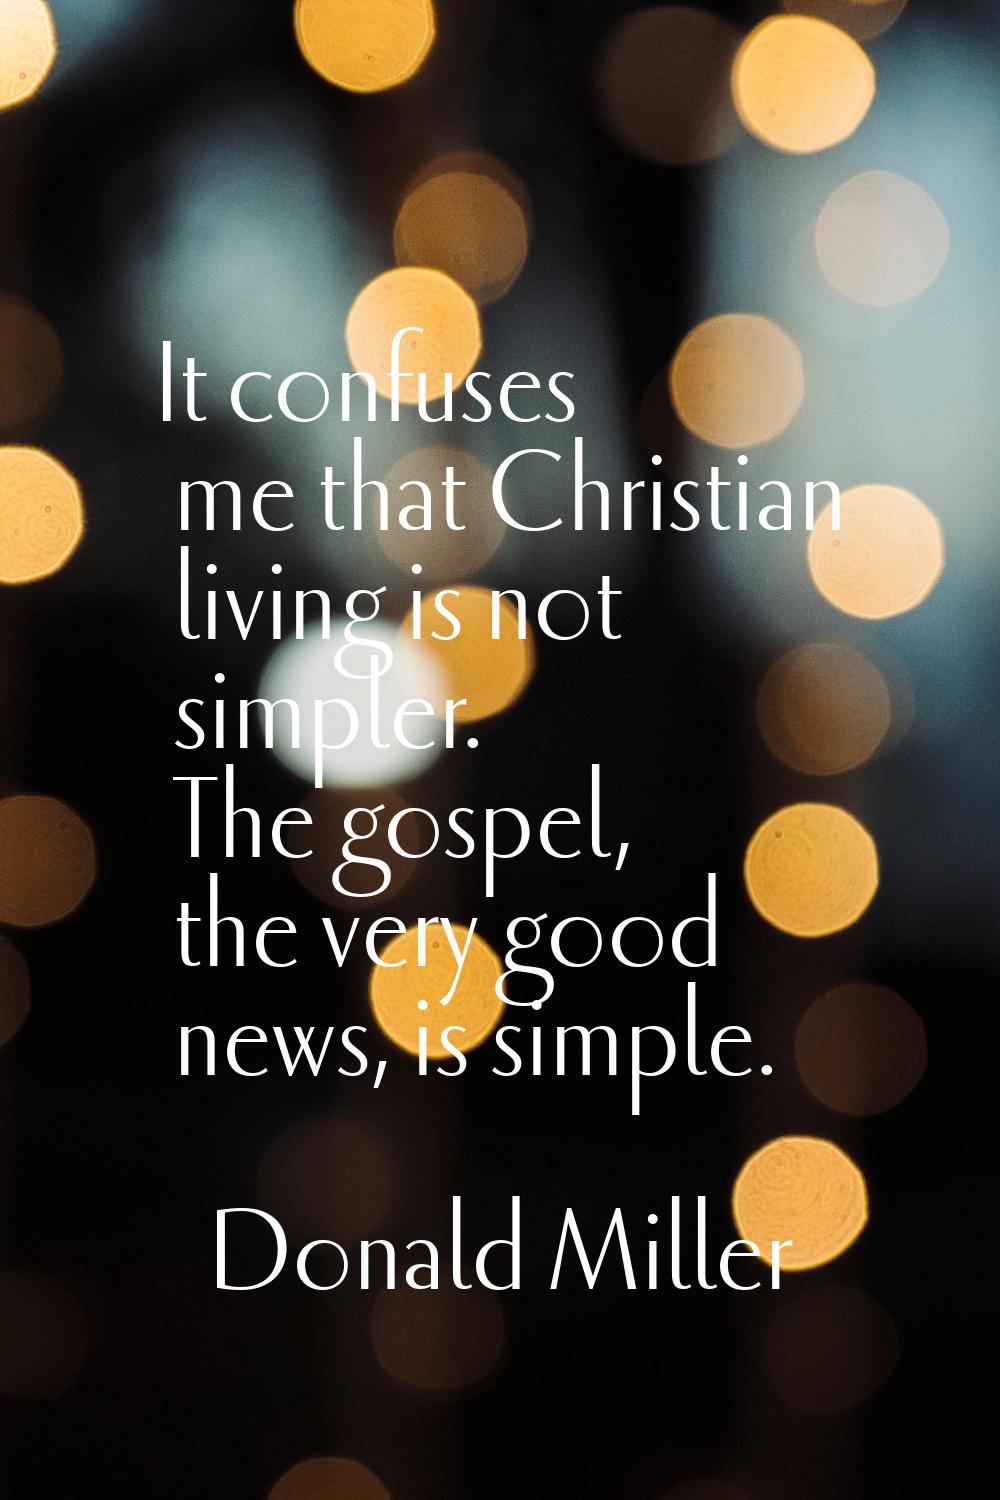 It confuses me that Christian living is not simpler. The gospel, the very good news, is simple.